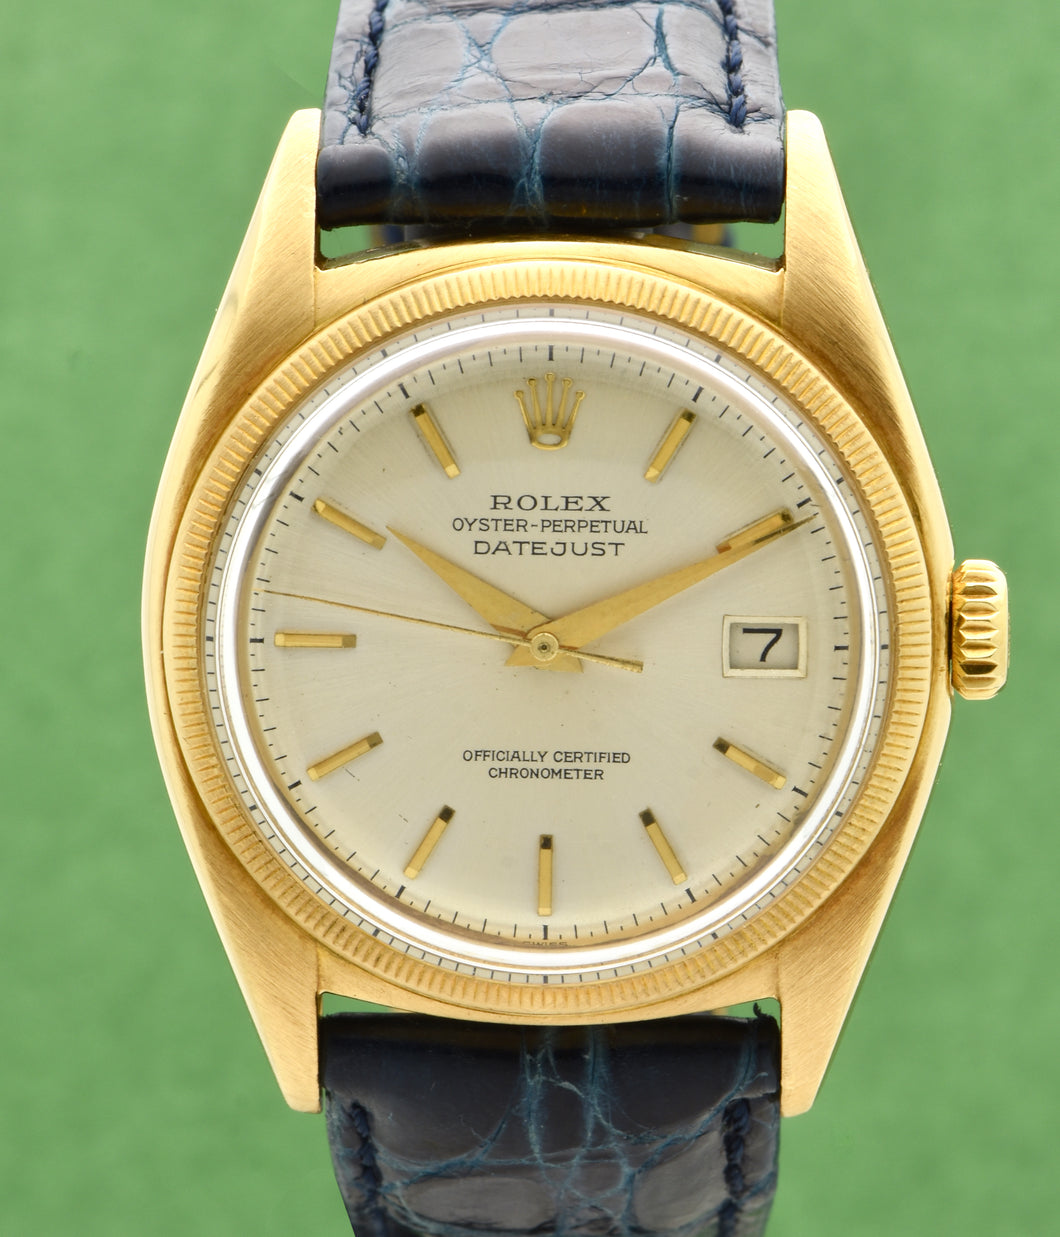 Rolex Oyster-Perpetual Datejust 